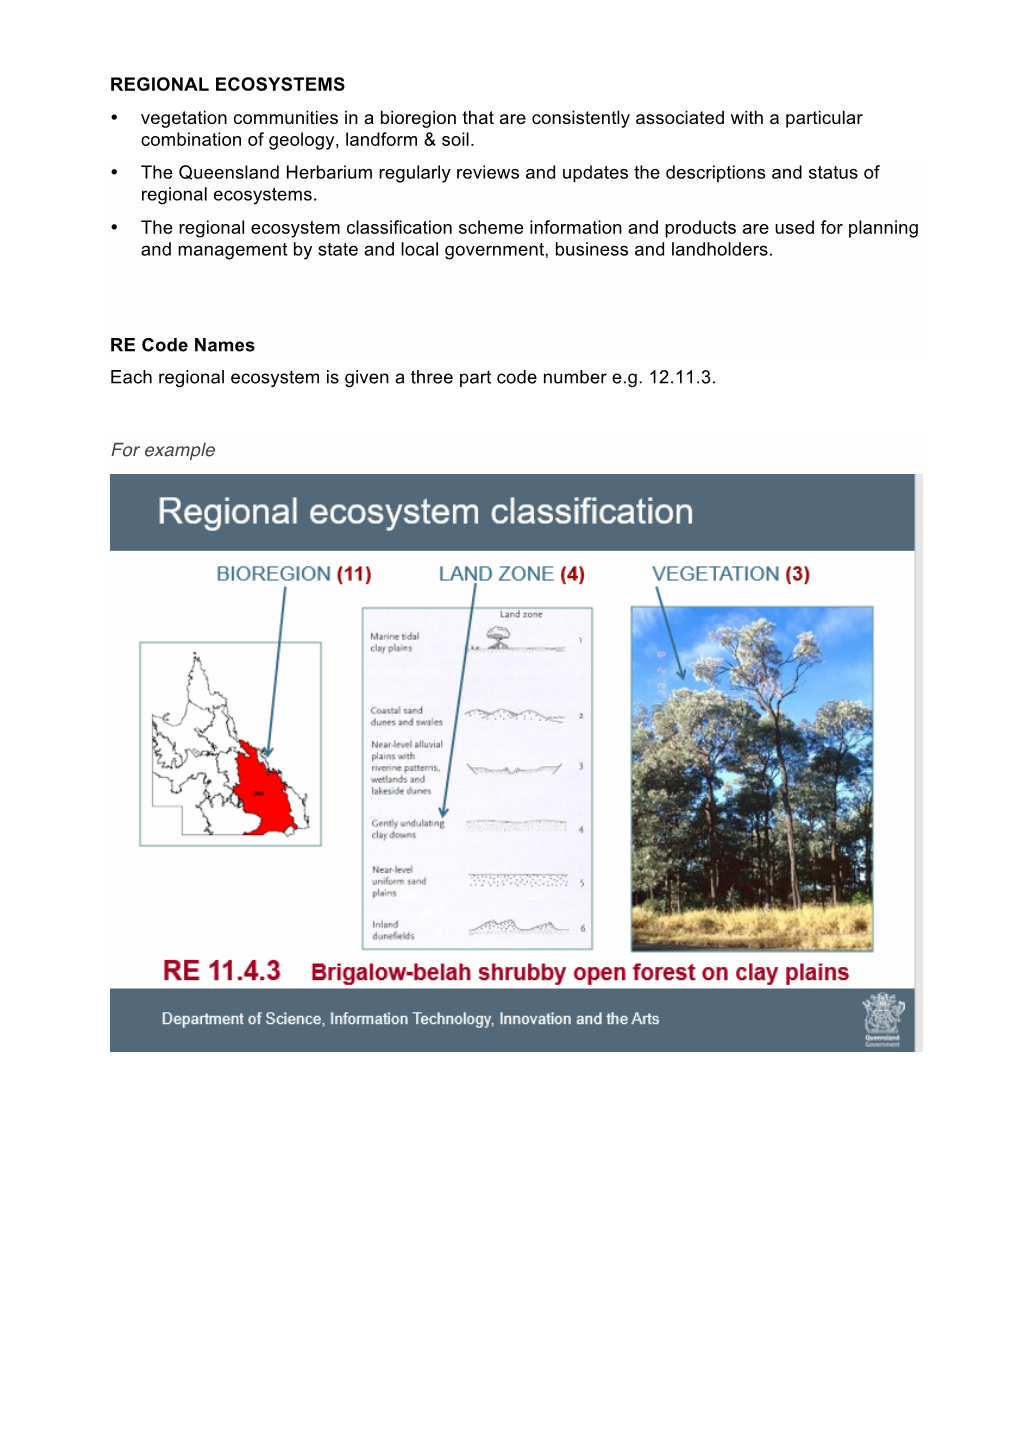 Regional Ecosystem Classification Scheme Information and Products Are Used for Planning and Management by State and Local Government, Business and Landholders